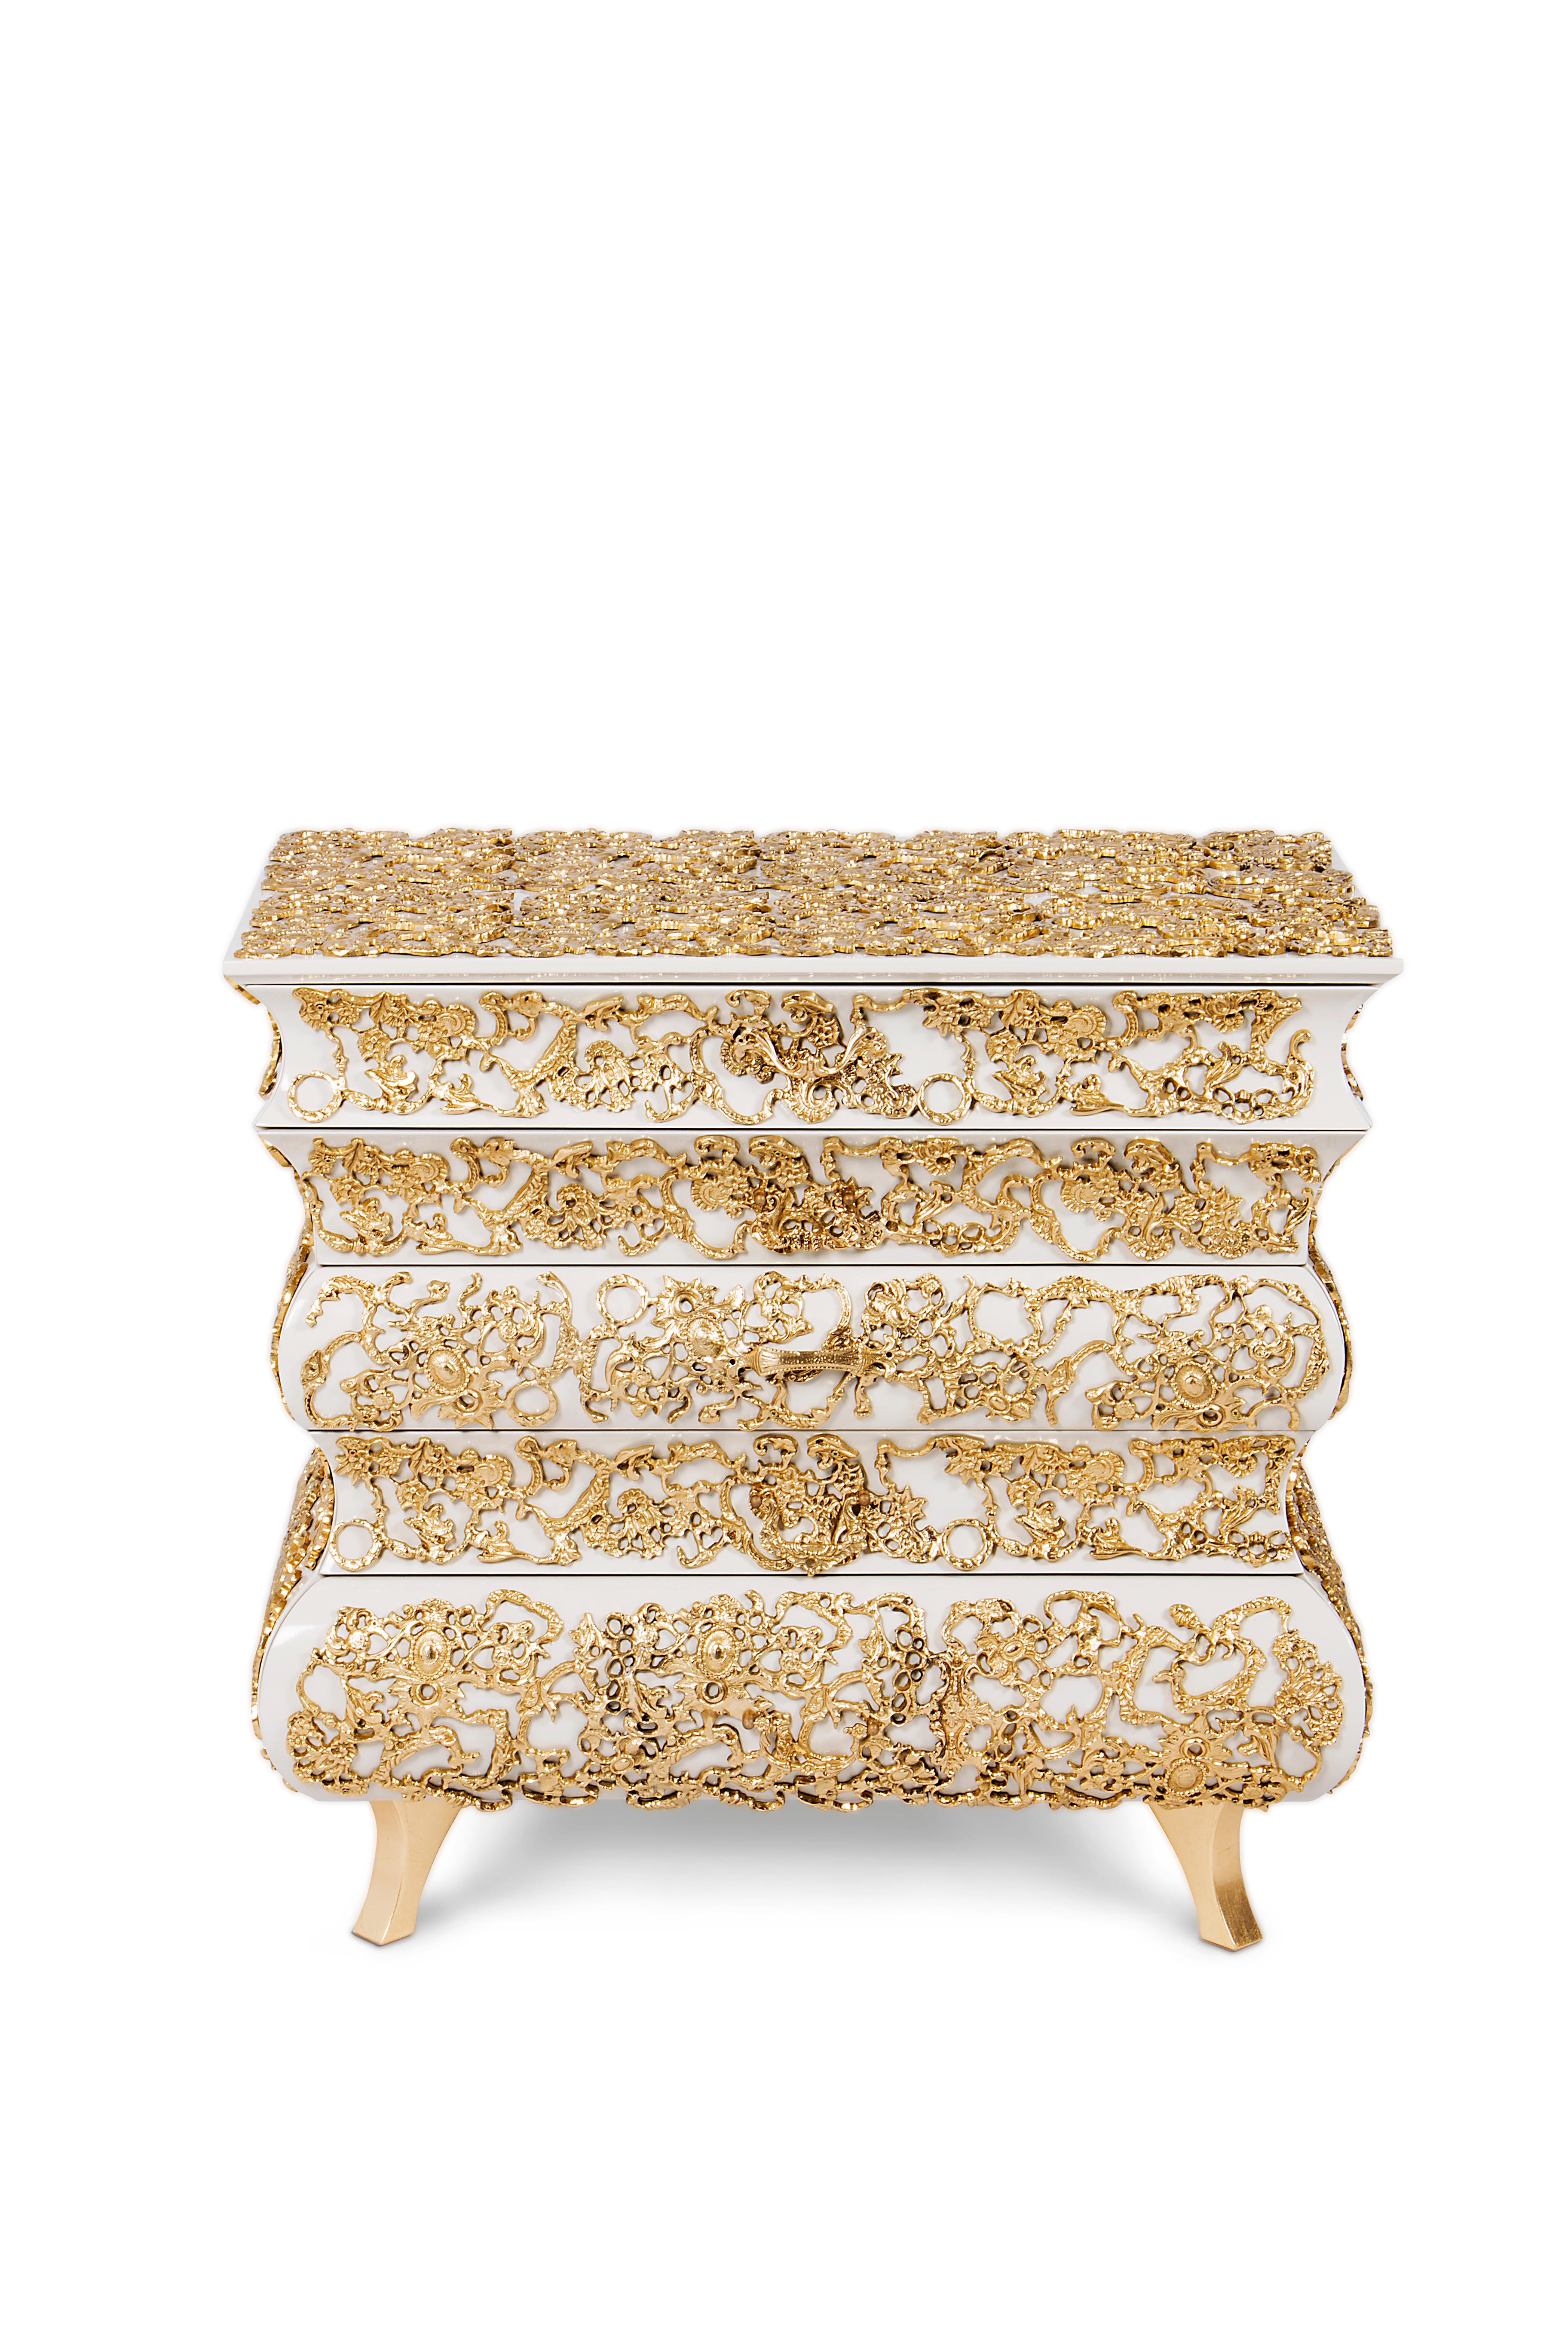 The crochet nightstand merges a traditional knitting technique, with the best of Portuguese luxury furniture design. Inspired by the artisan method popular in Europe during the 19th century, the crochet nightstand is rich in texture and has a